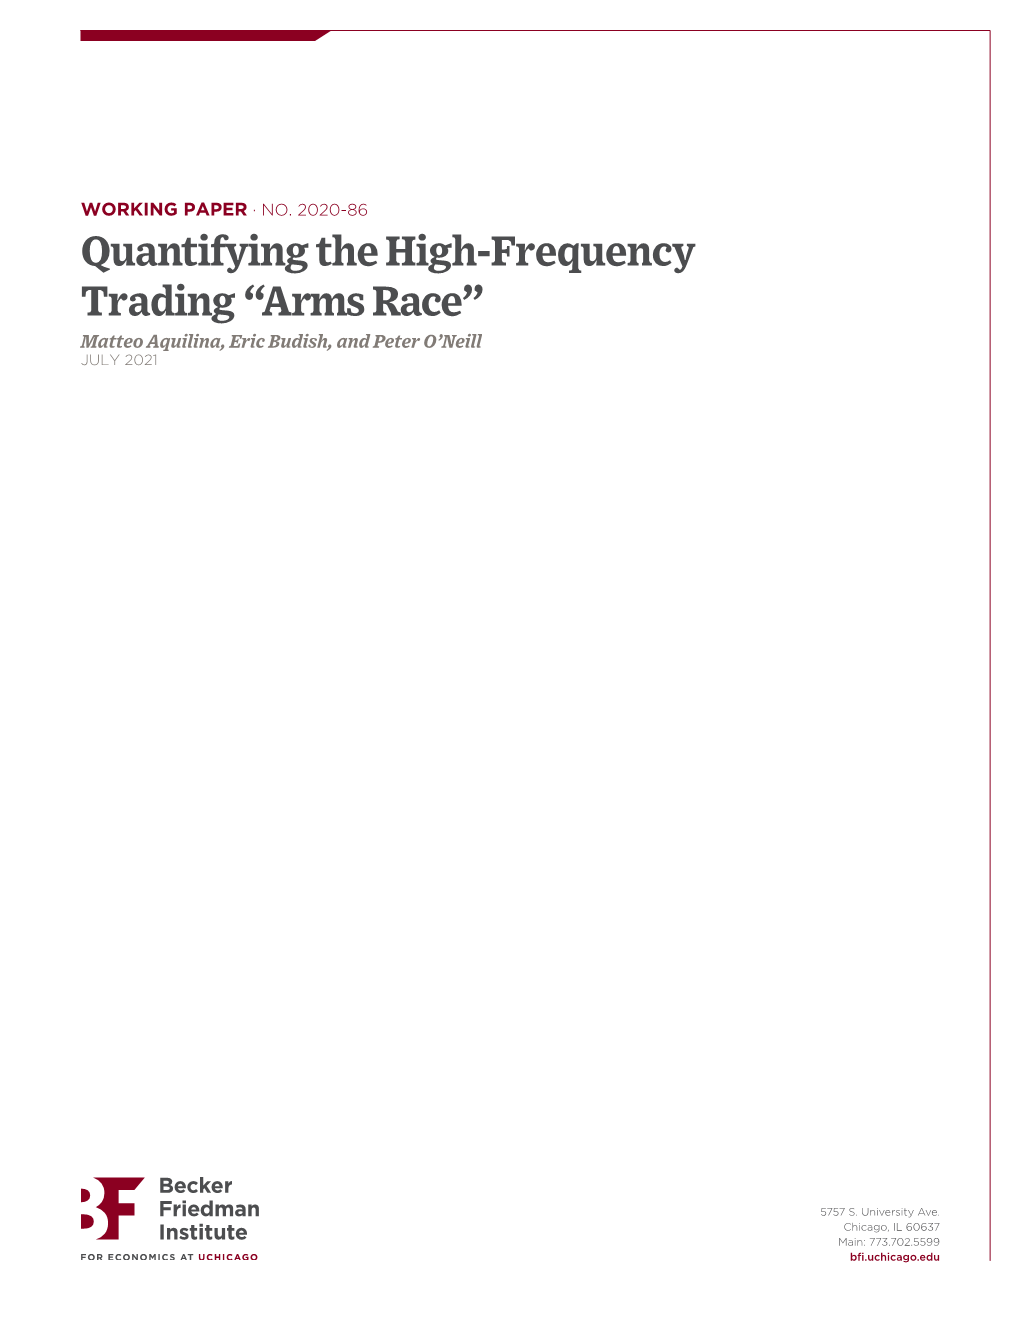 Quantifying the High-Frequency Trading “Arms Race” Matteo Aquilina, Eric Budish, and Peter O’Neill JULY 2021